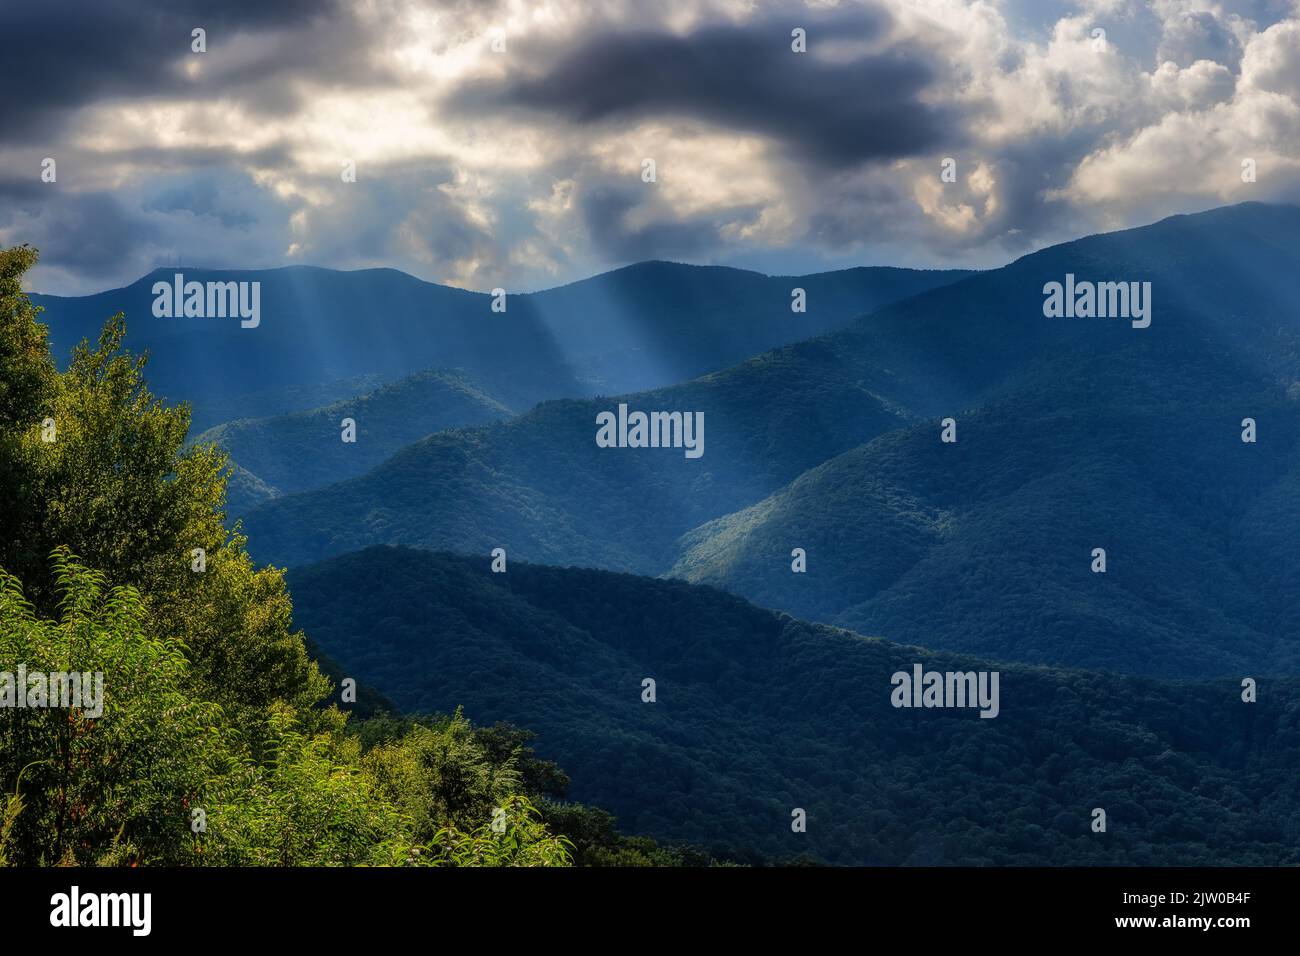 Scenic breath taking views of the Blue Ridge Mountains as one travels the Blue Ridge Parkway in North Carolina, USA. Stock Photo